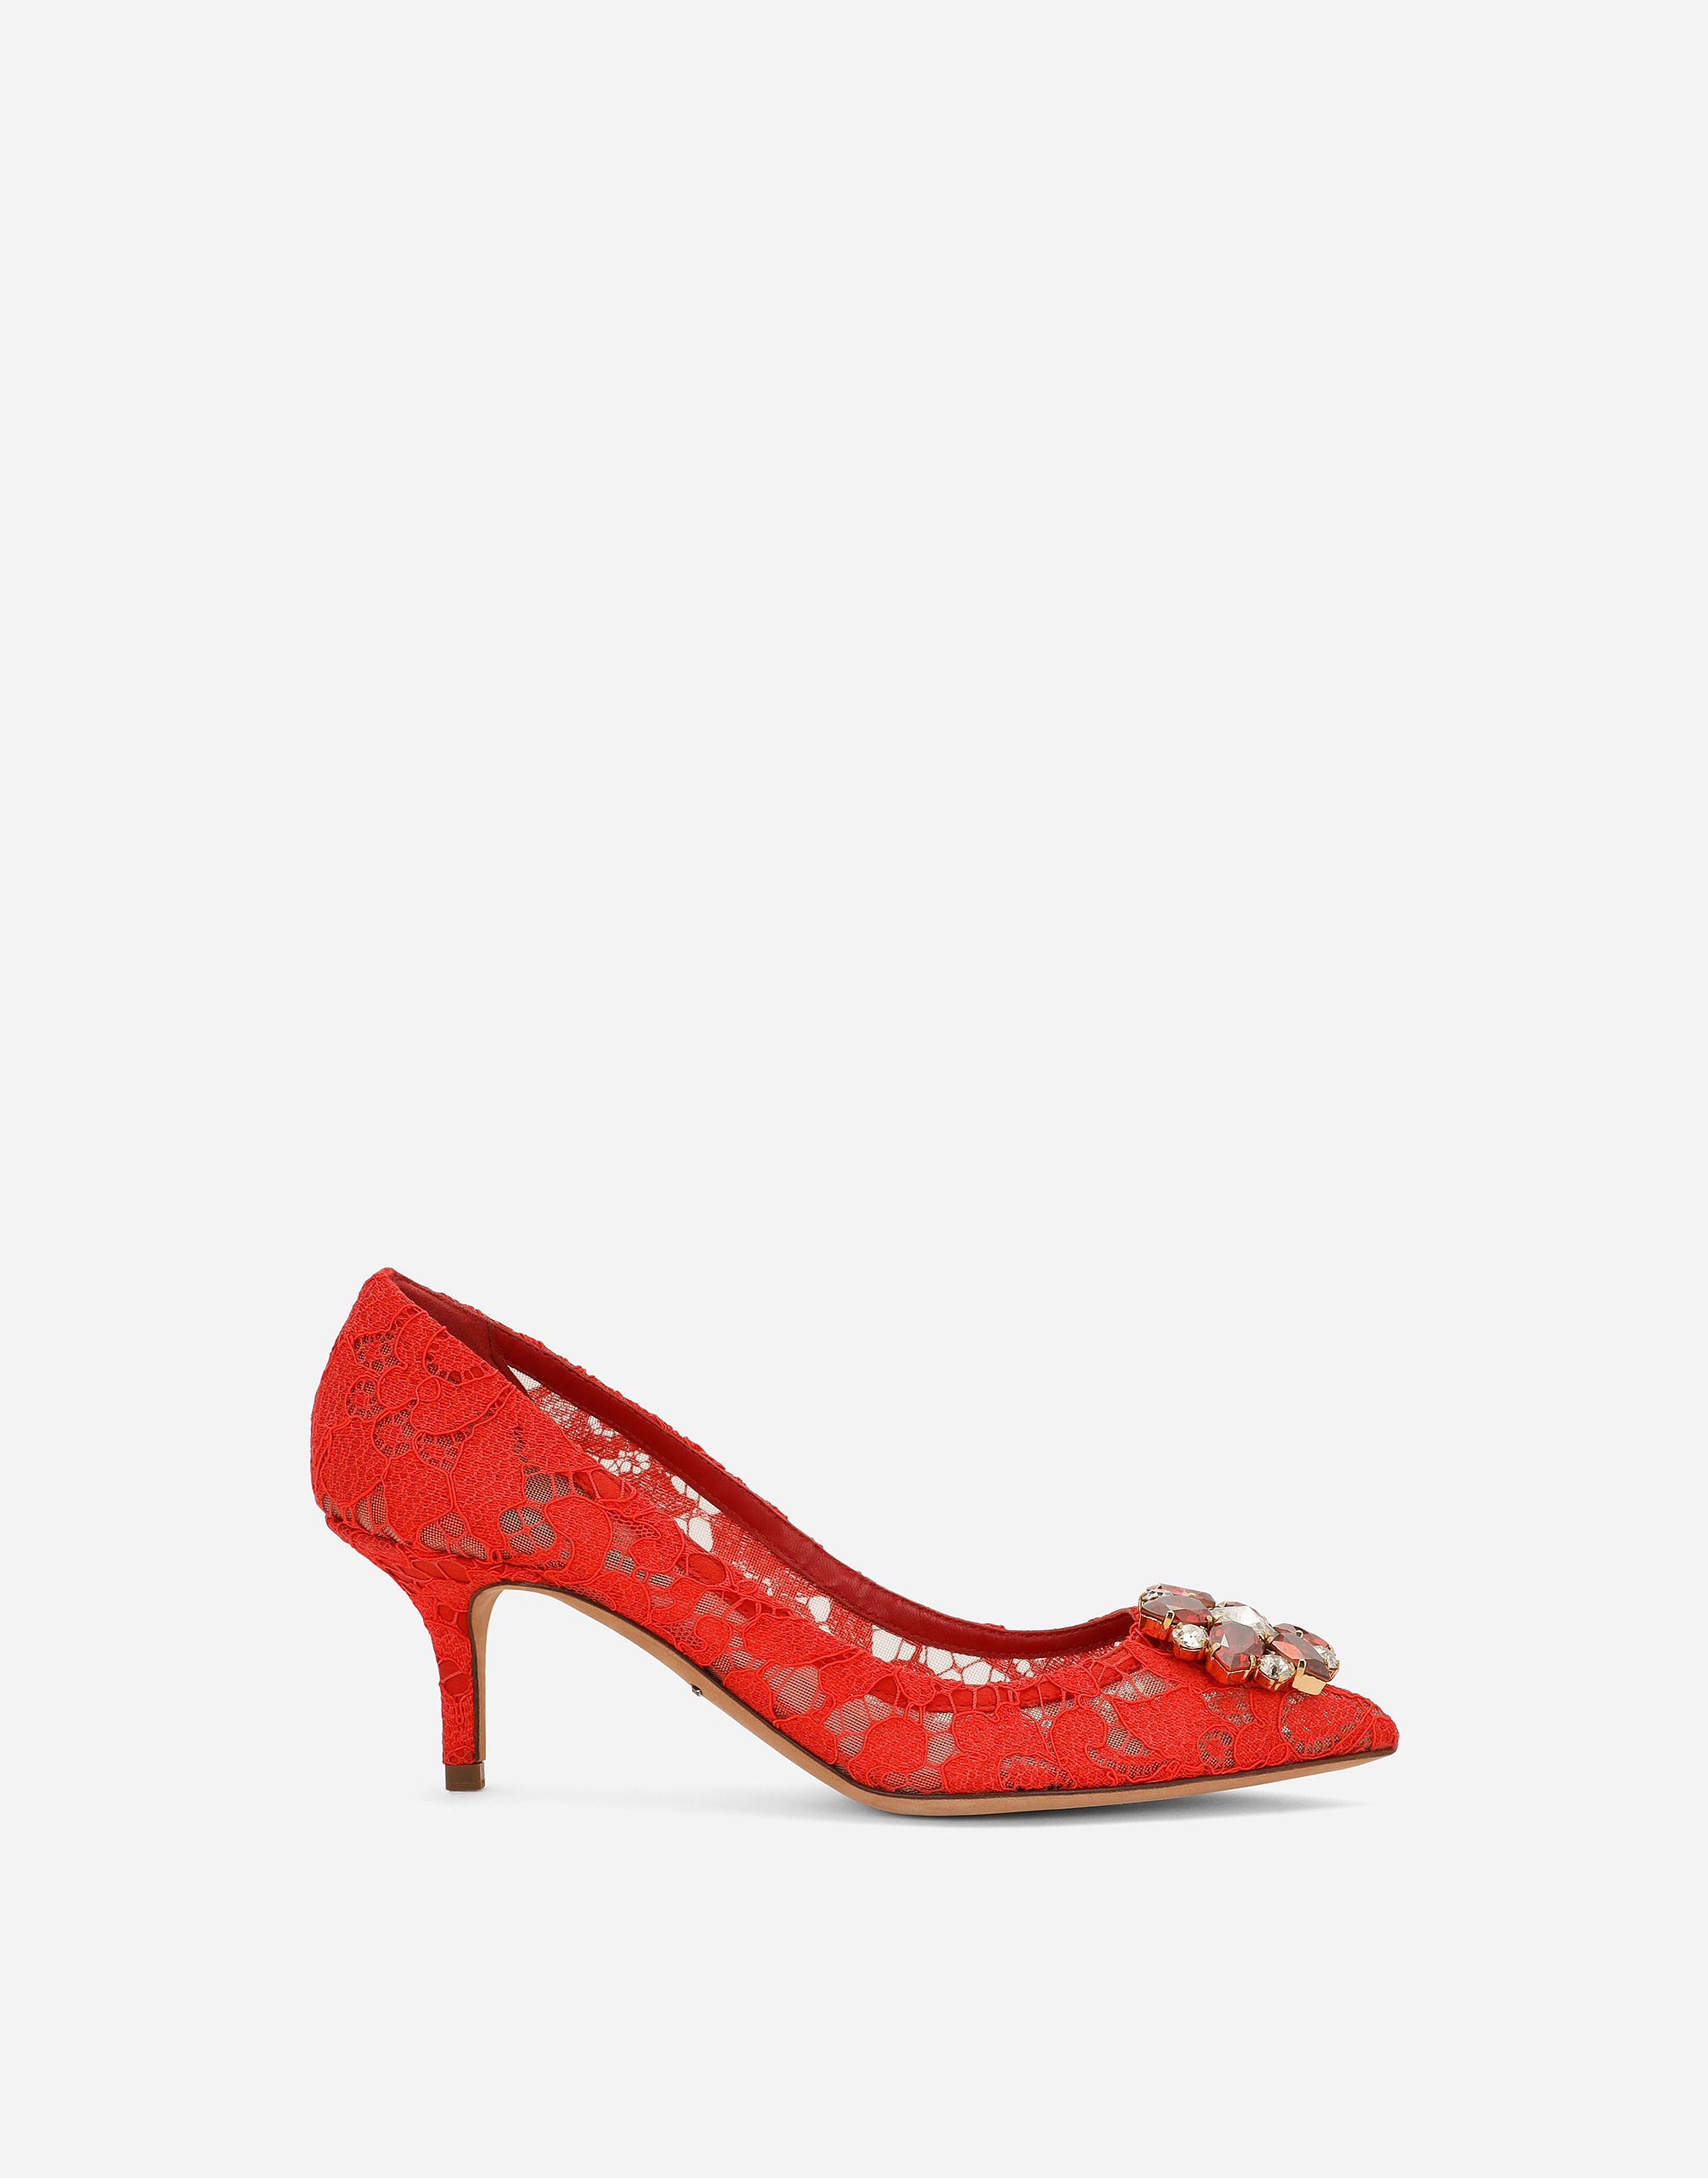 Lace rainbow pumps with brooch detailing in Red